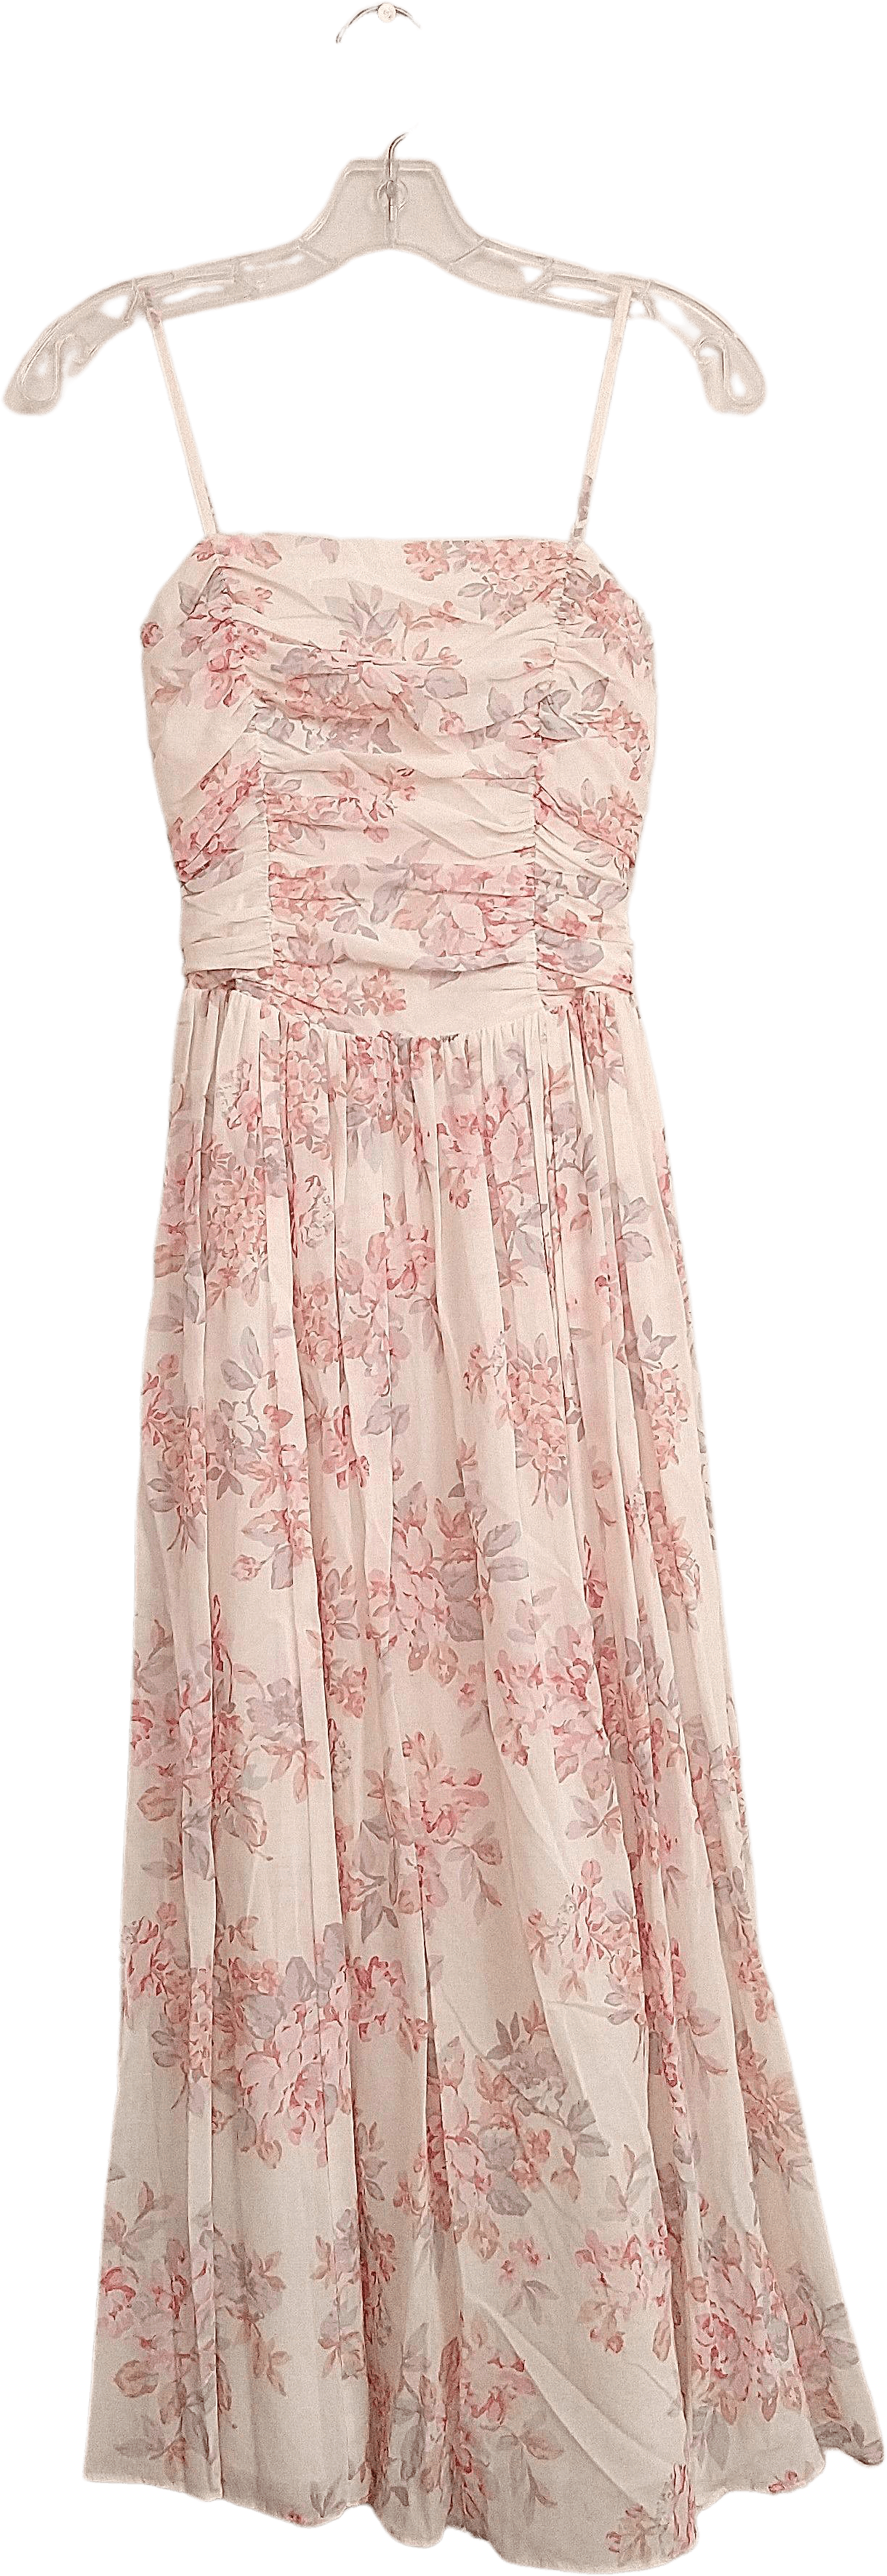 Vintage 80’s Dreamy White and Pink Floral Sundress with Boning and Full ...